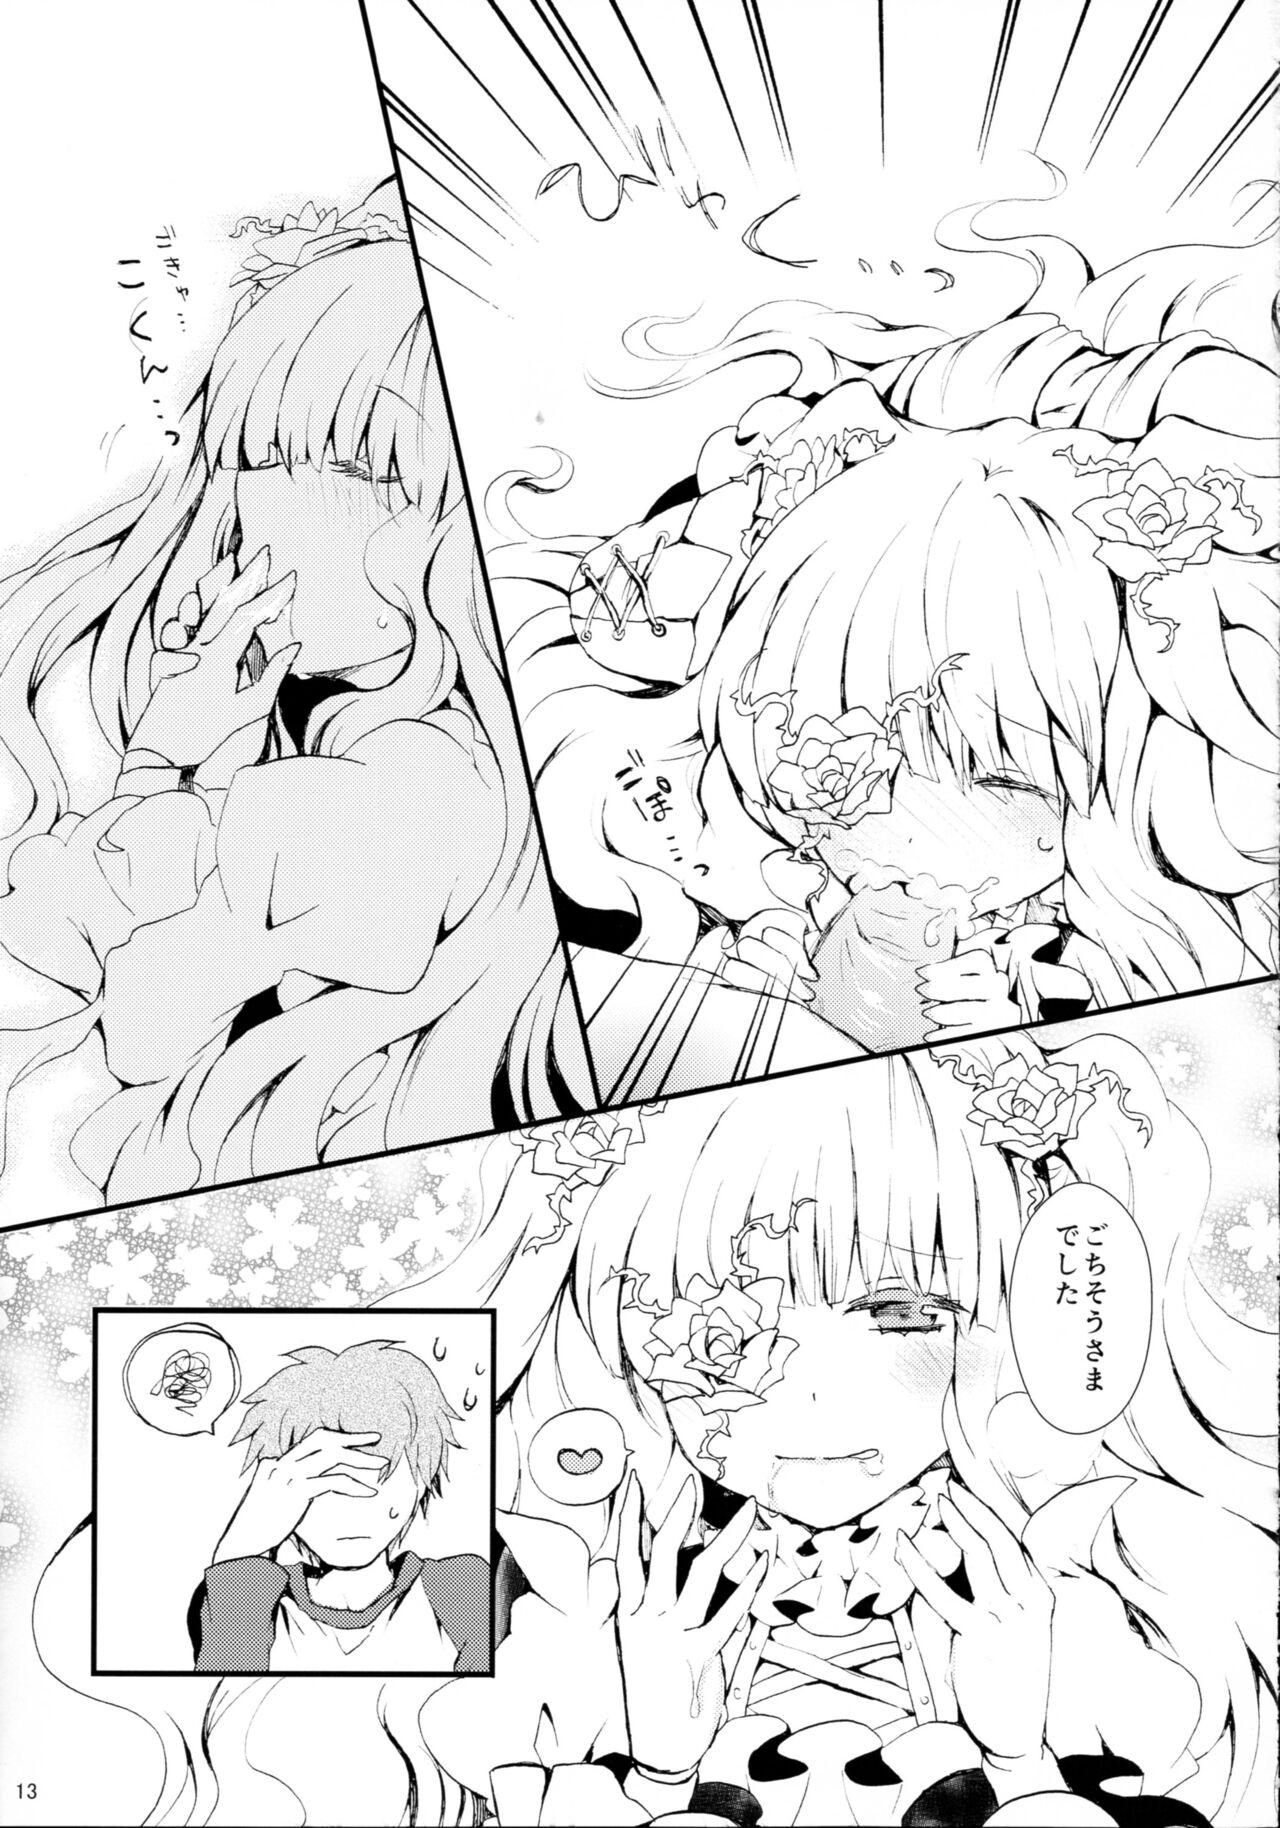 Club Eat me, Drink me - Rozen maiden Glamour Porn - Page 10